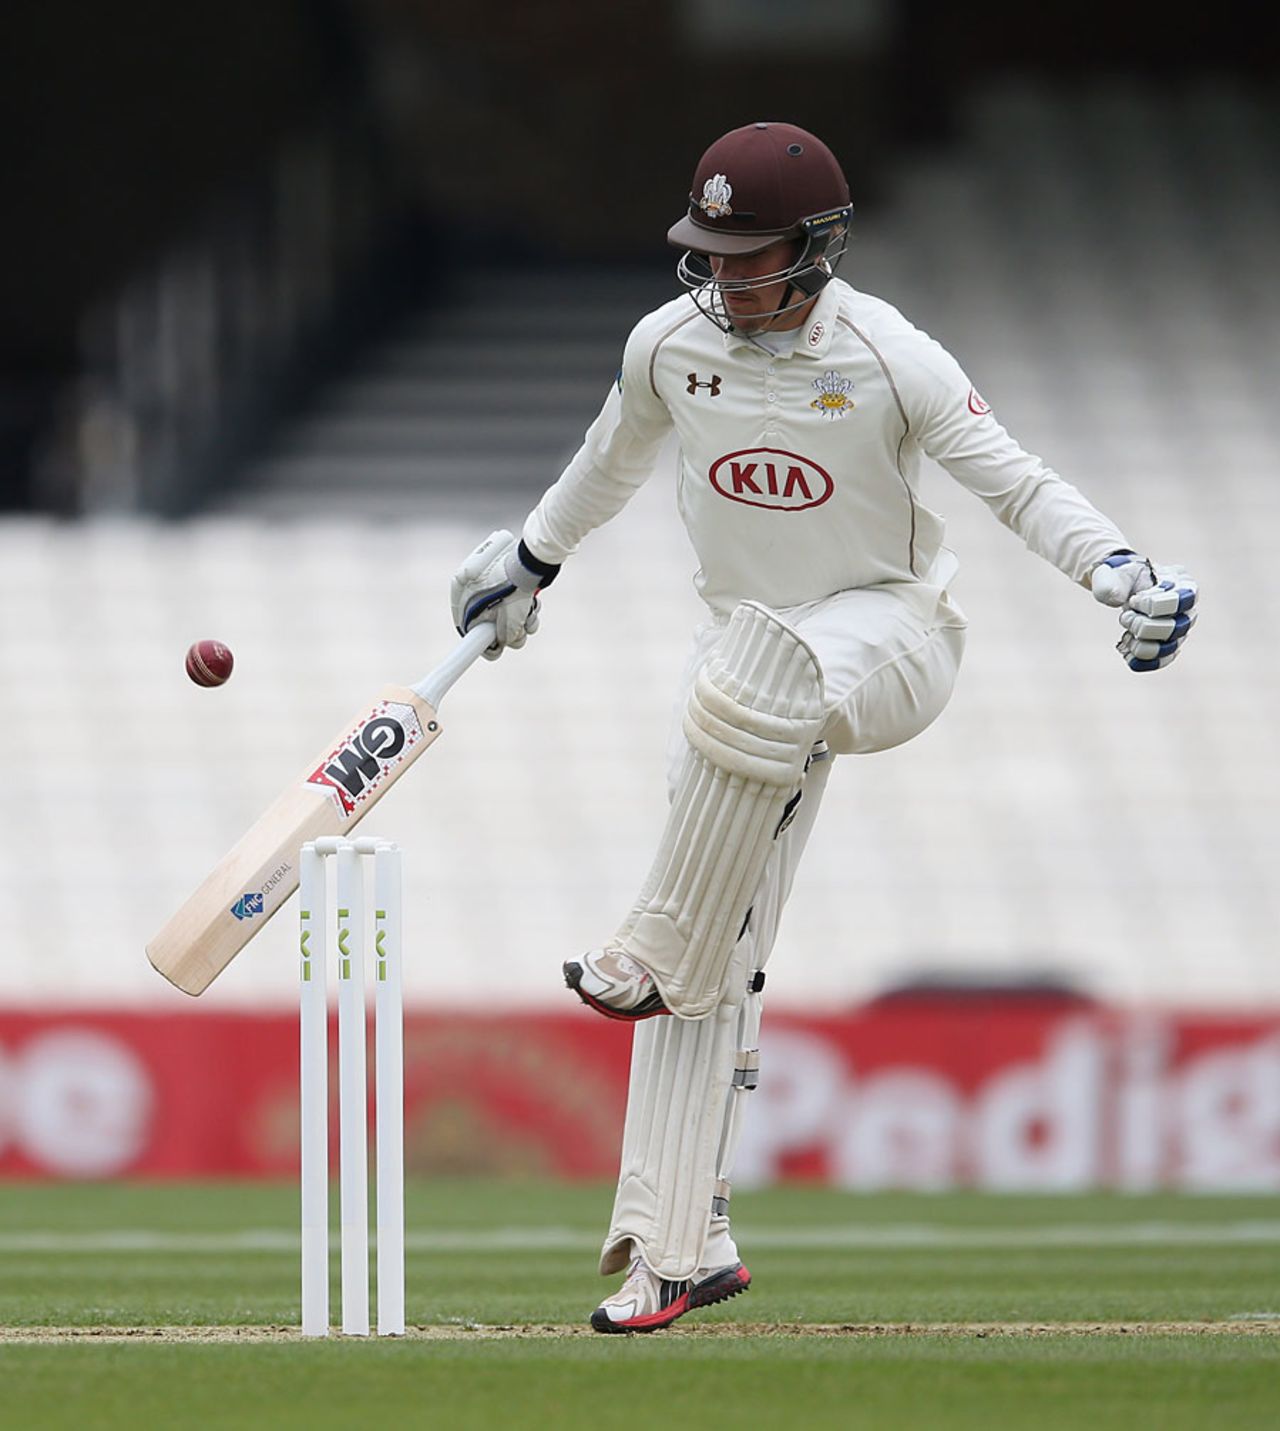 Rory Burns needed some nifty footwork to keep the ball away from the stumps, Surrey v Essex, County Championship Division Two, The Oval, 1st day, April 26, 2015